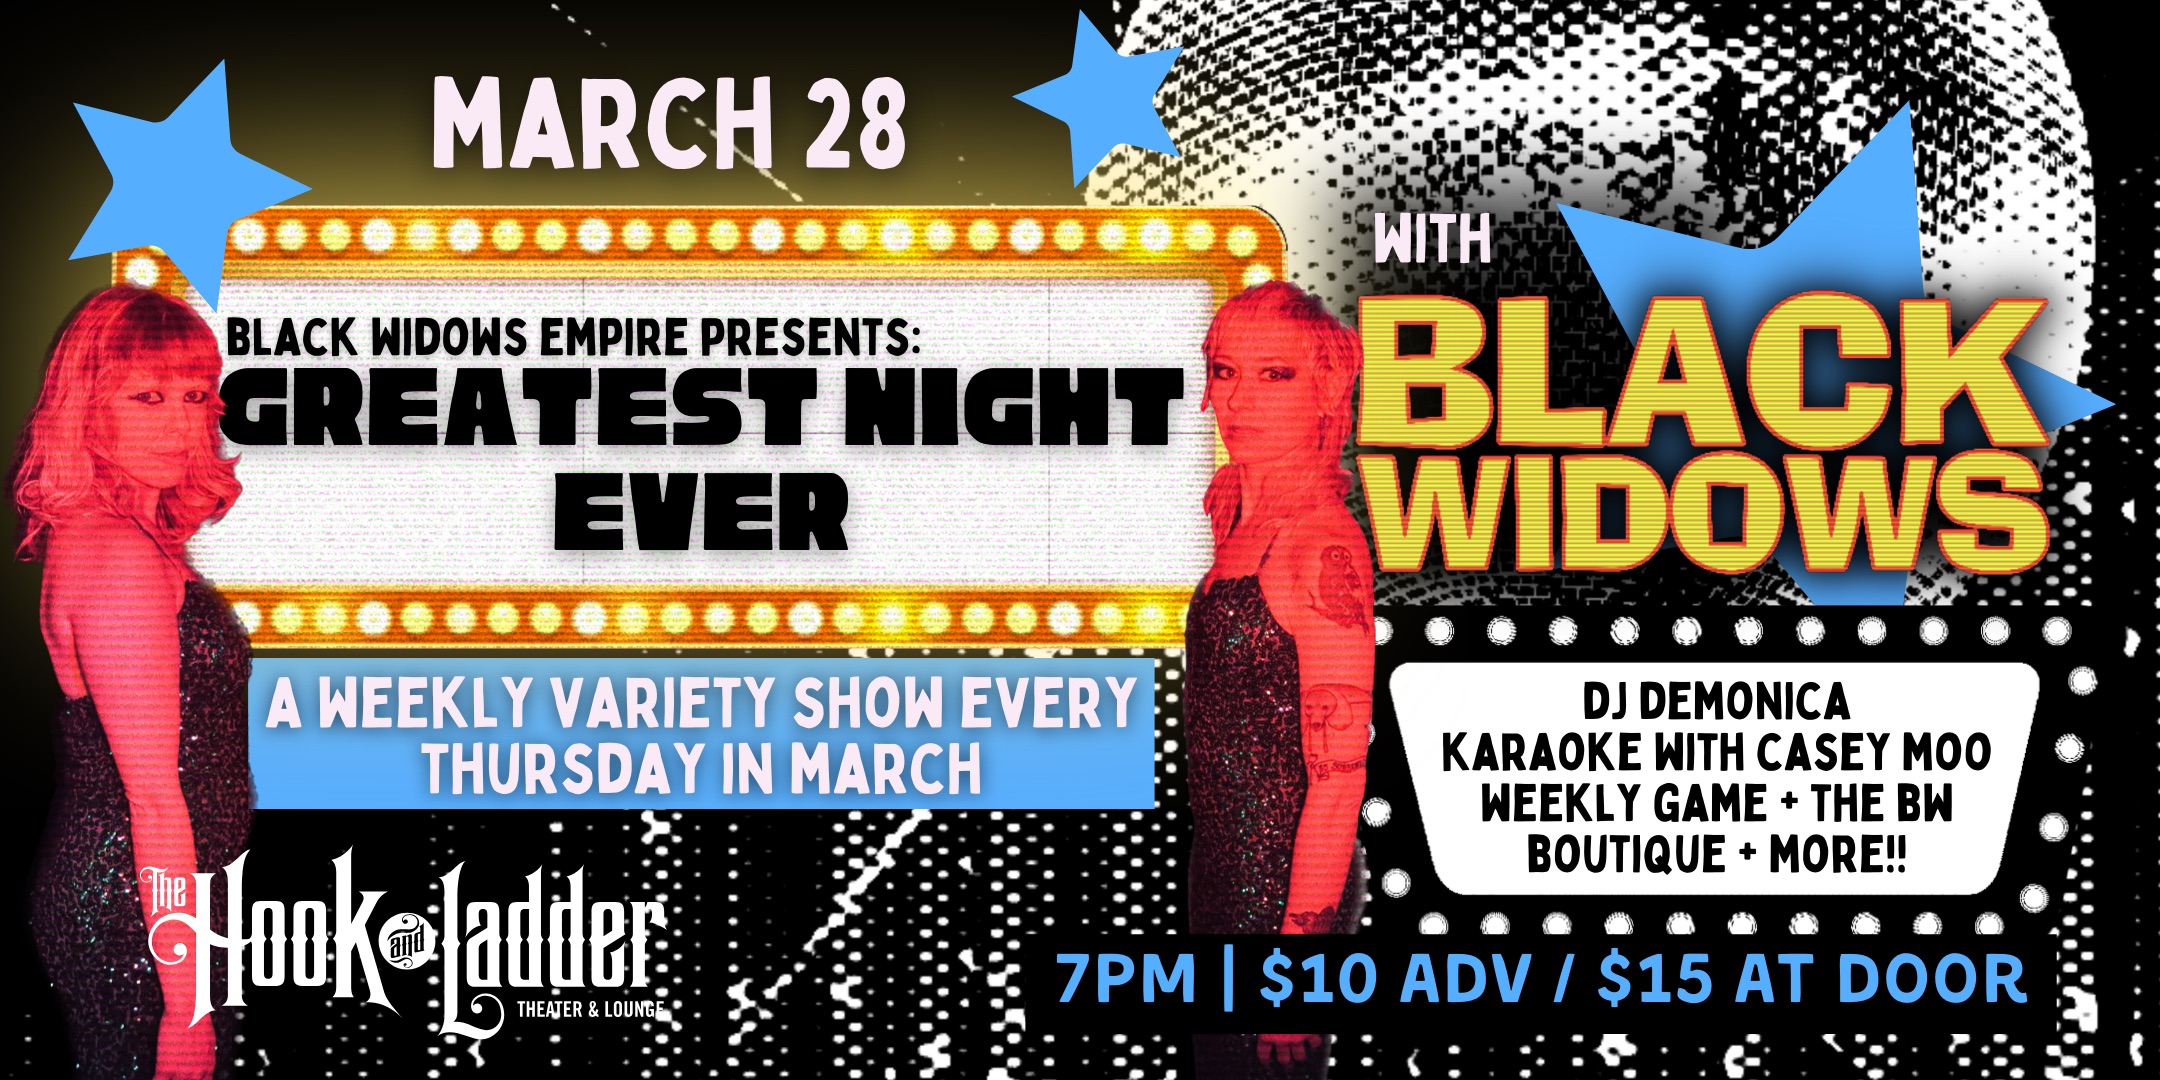 Black Widows Presents: Greatest Night Ever Residency with Black Widows, Dj Demonica, Karaoke with Casey Moo, Jeff Pariseau, and a variety open mic starring YOU! Thursday, March 28 The Mission Room at The Hook and Ladder Theater Doors 7:00pm :: Music 7:30pm :: 21+ $10 ADV / $15 DOS